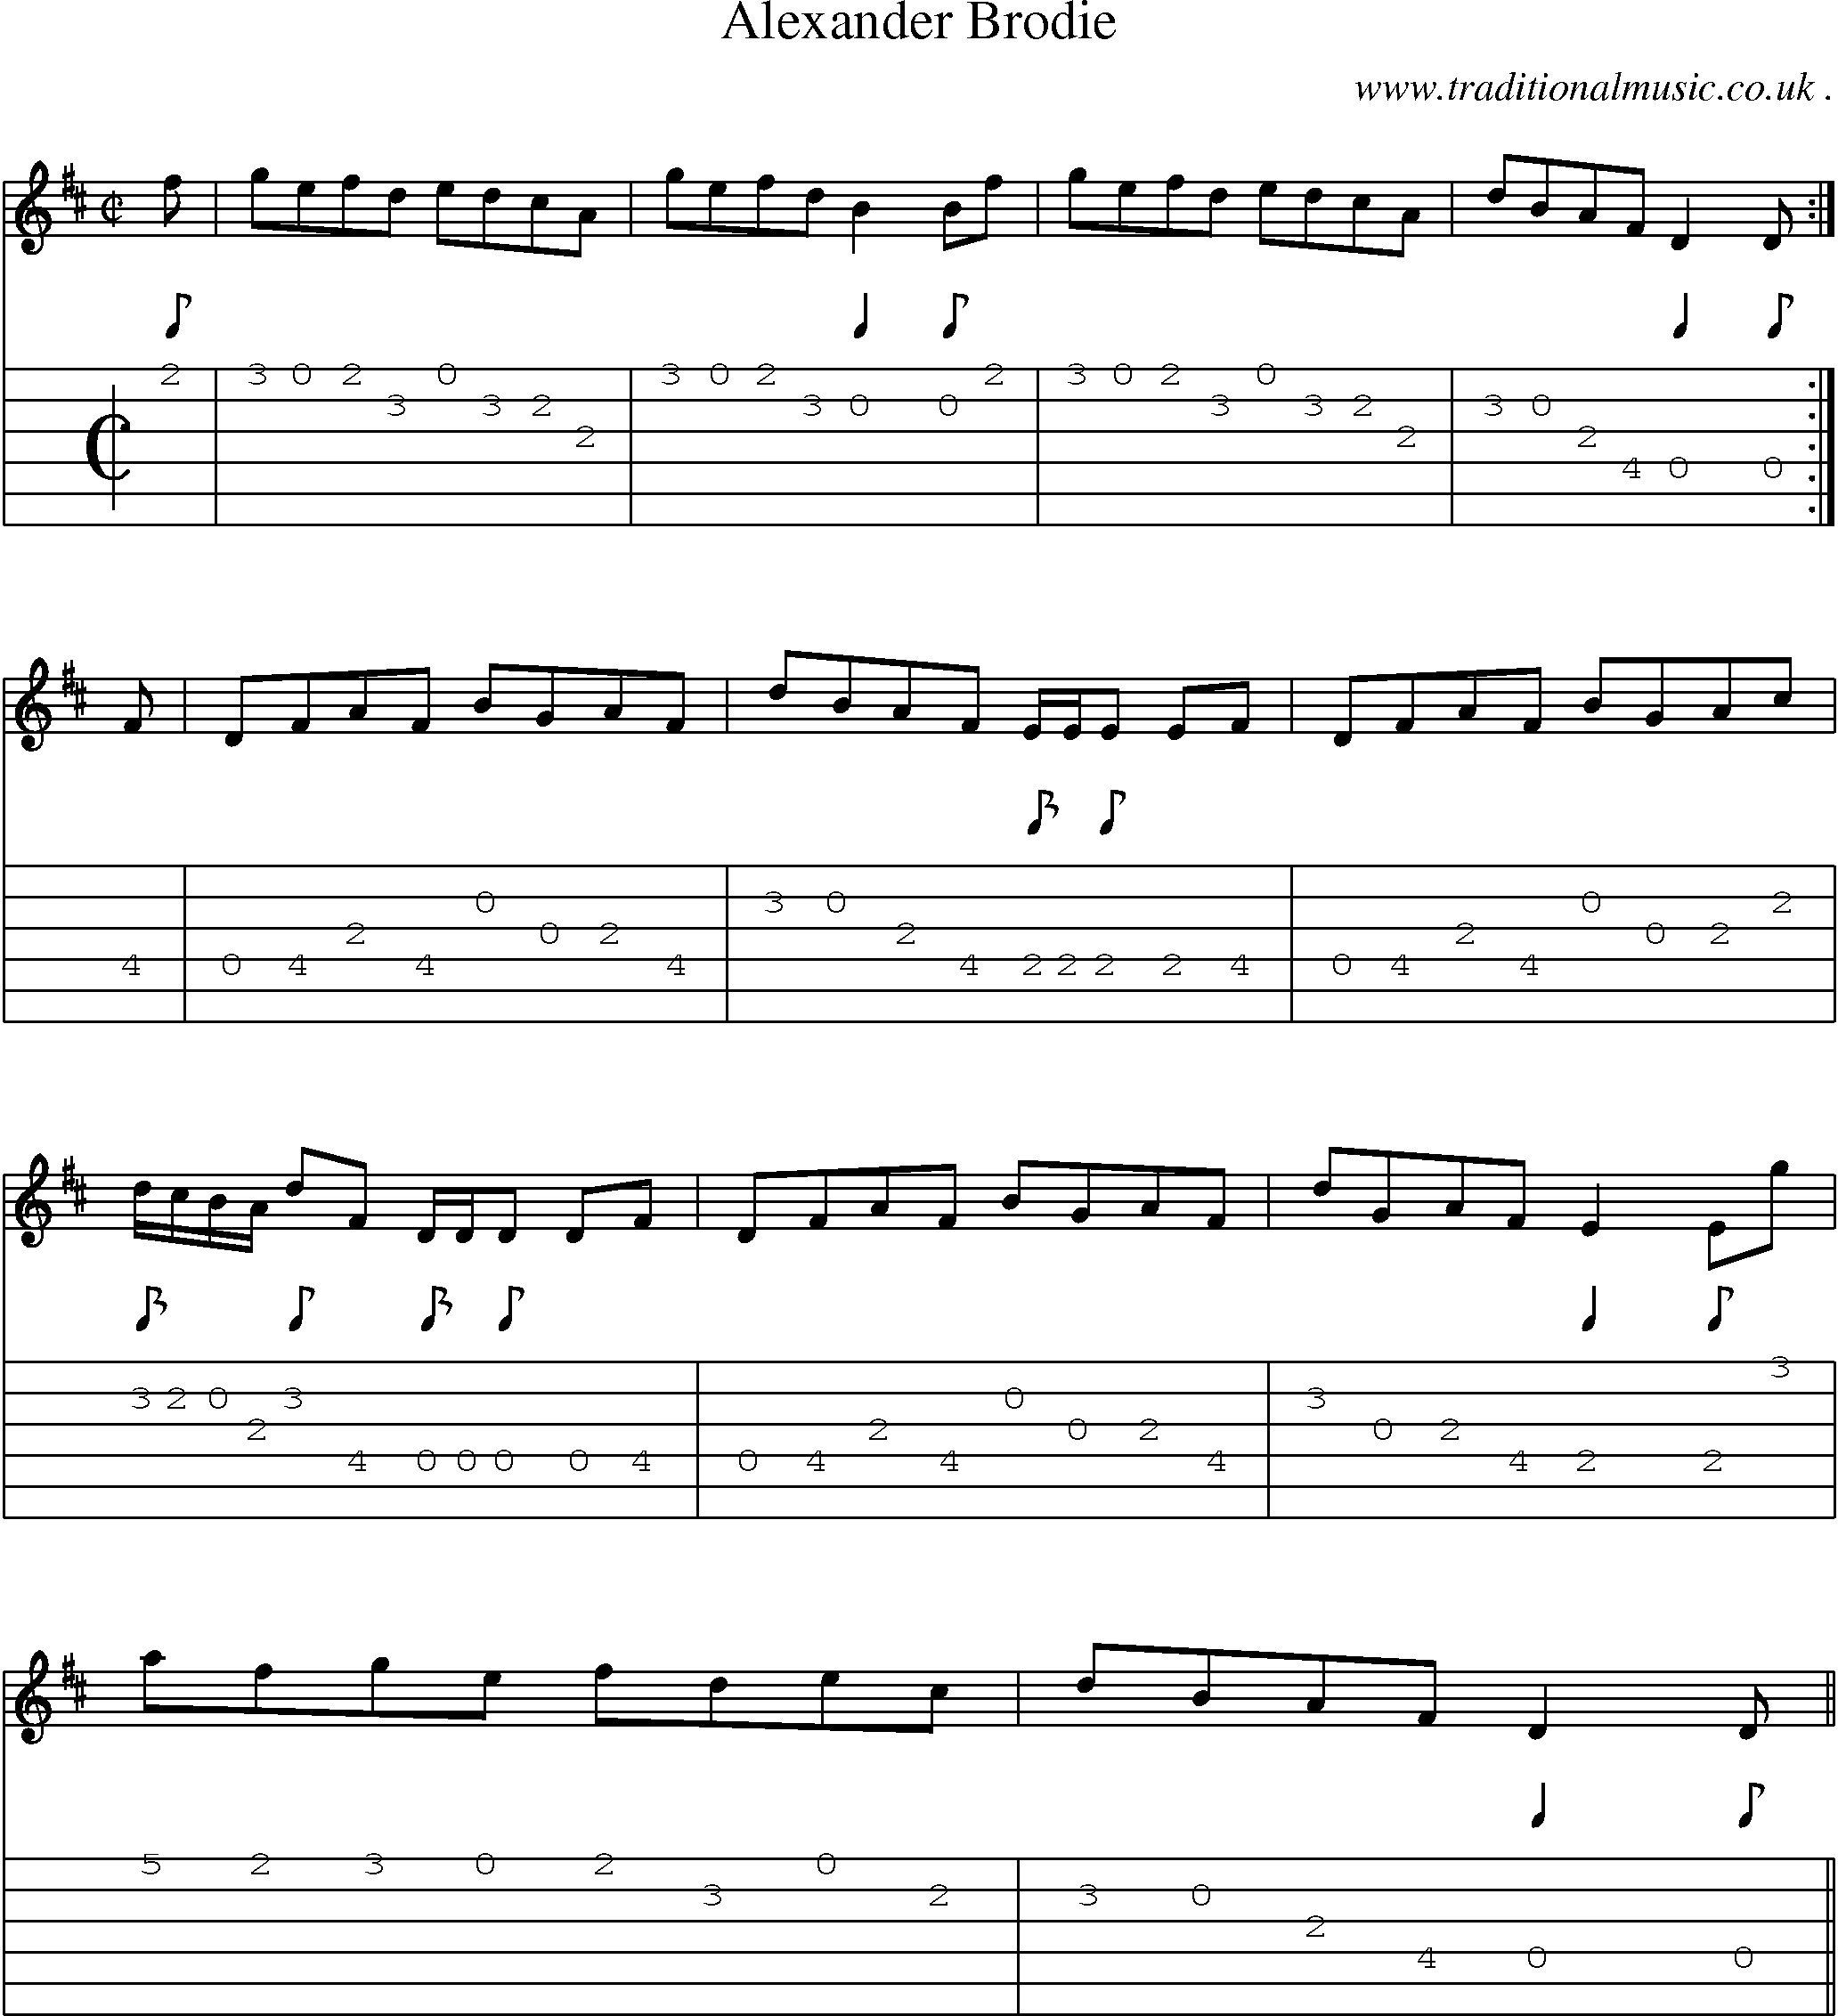 Sheet-music  score, Chords and Guitar Tabs for Alexander Brodie